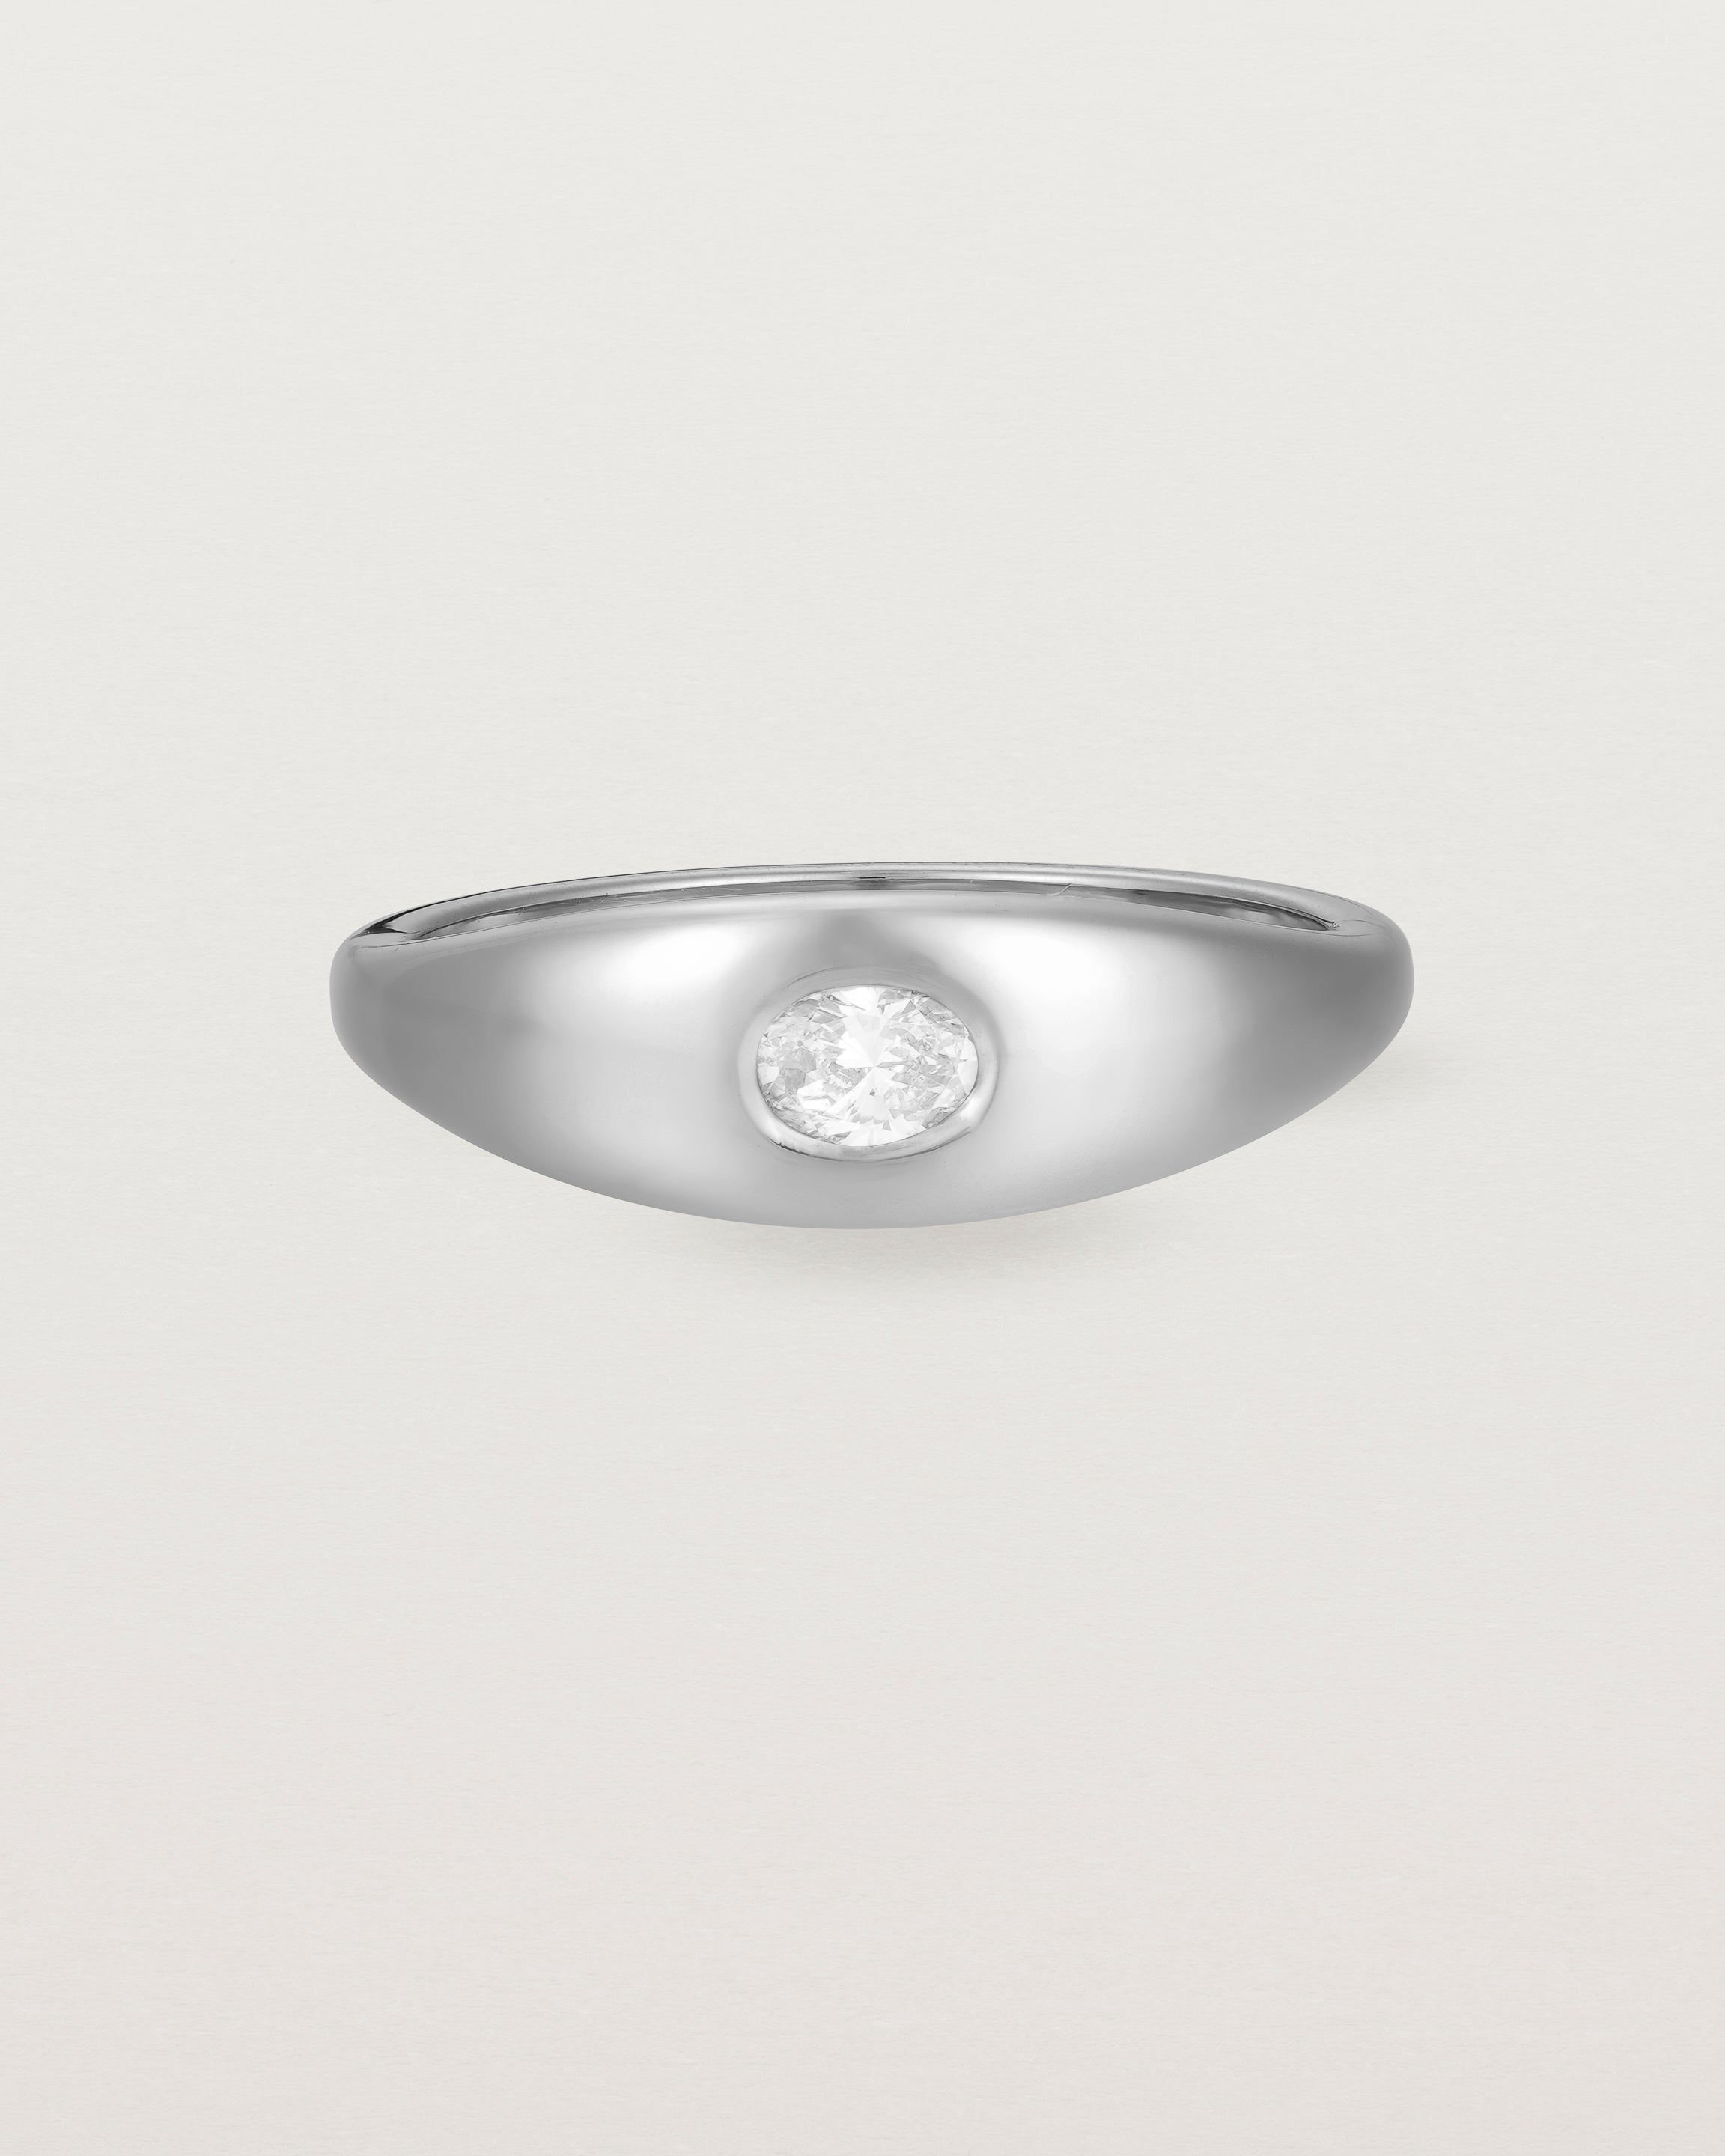 Front view of the Seule Single Ring | Diamond | White Gold.